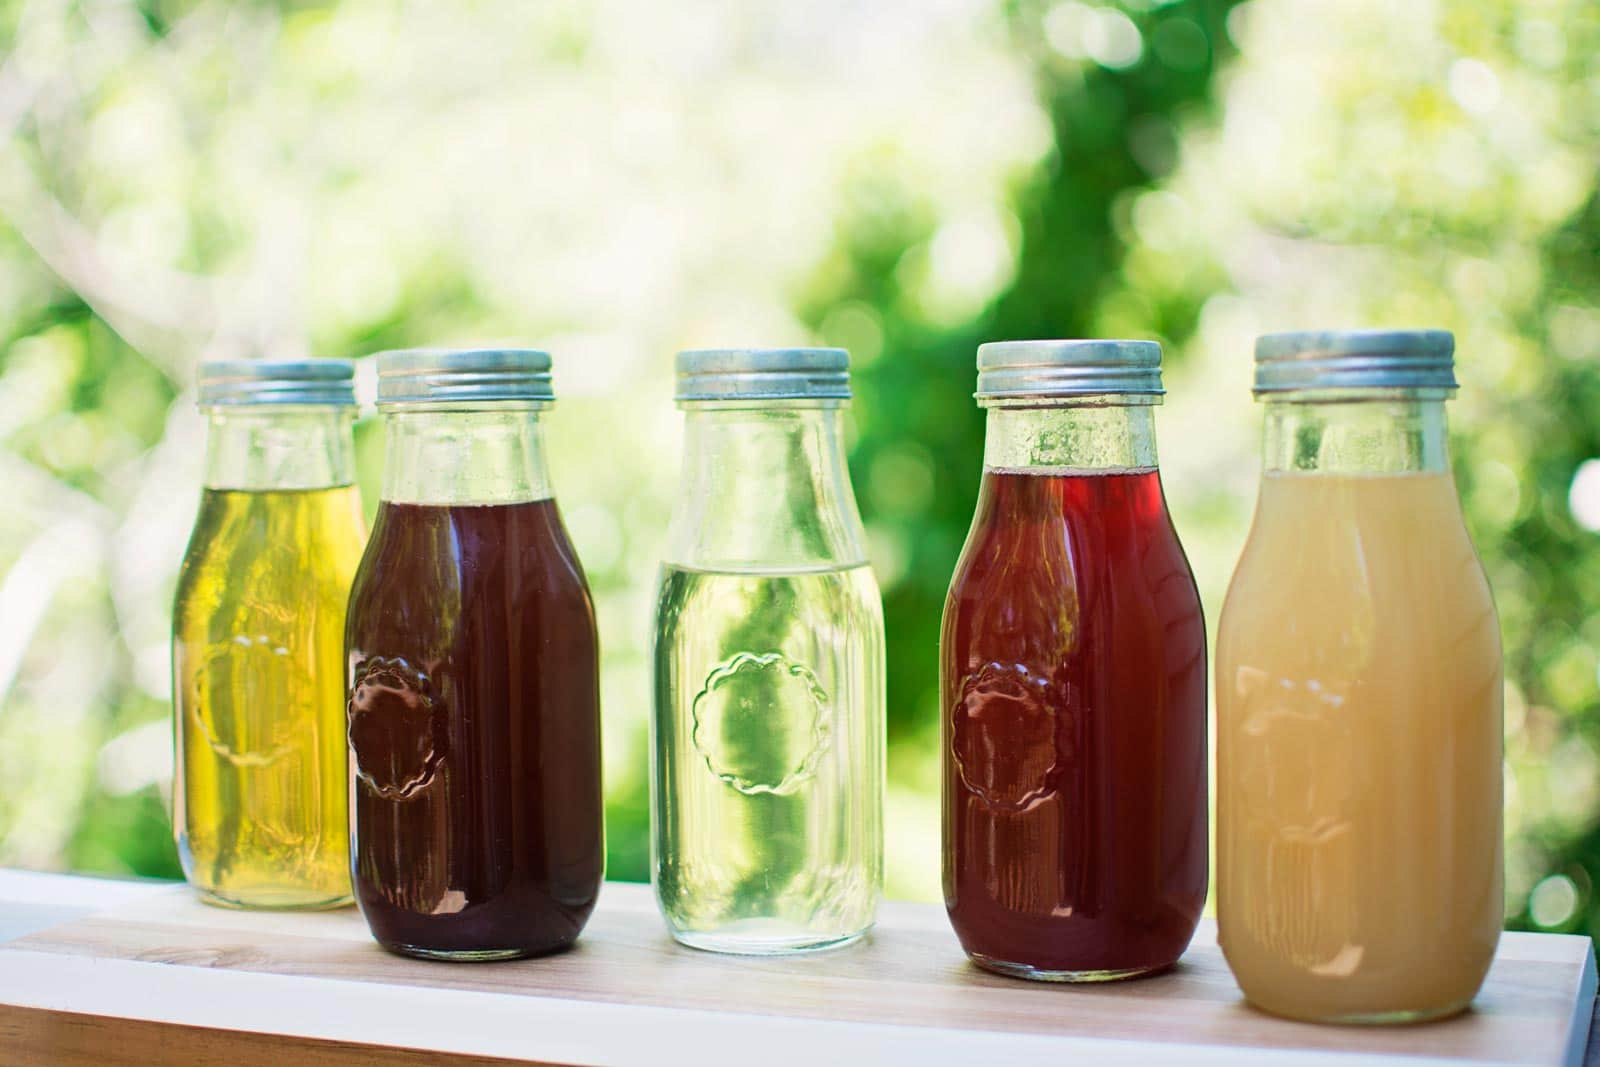 Flavored syrups in jars.